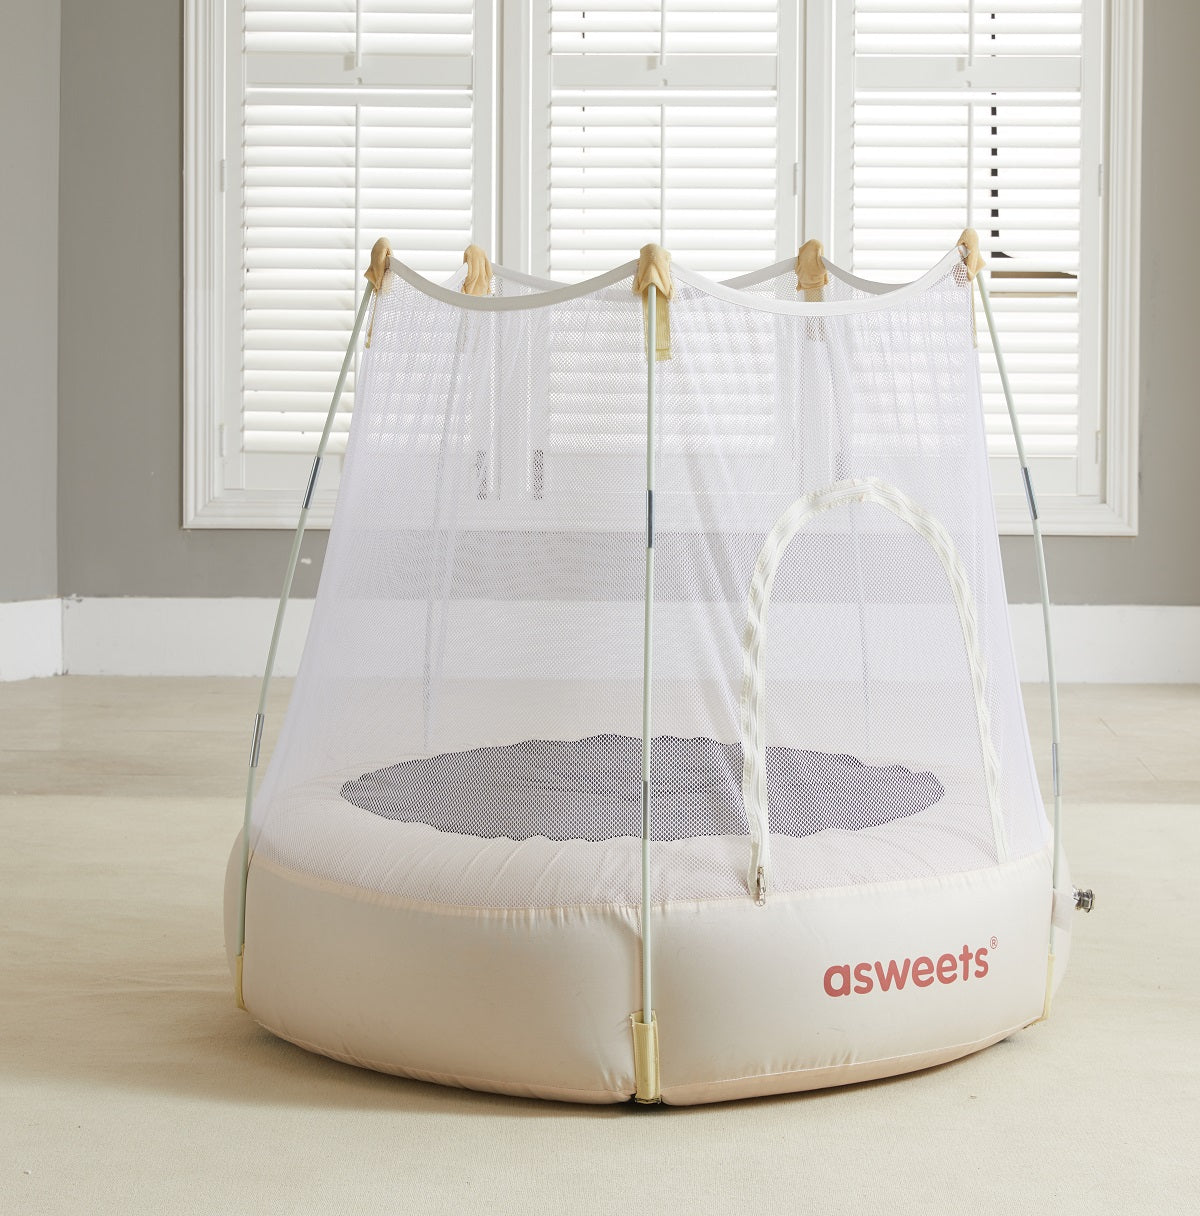 Asweets Kids Inflatable Trampoline White